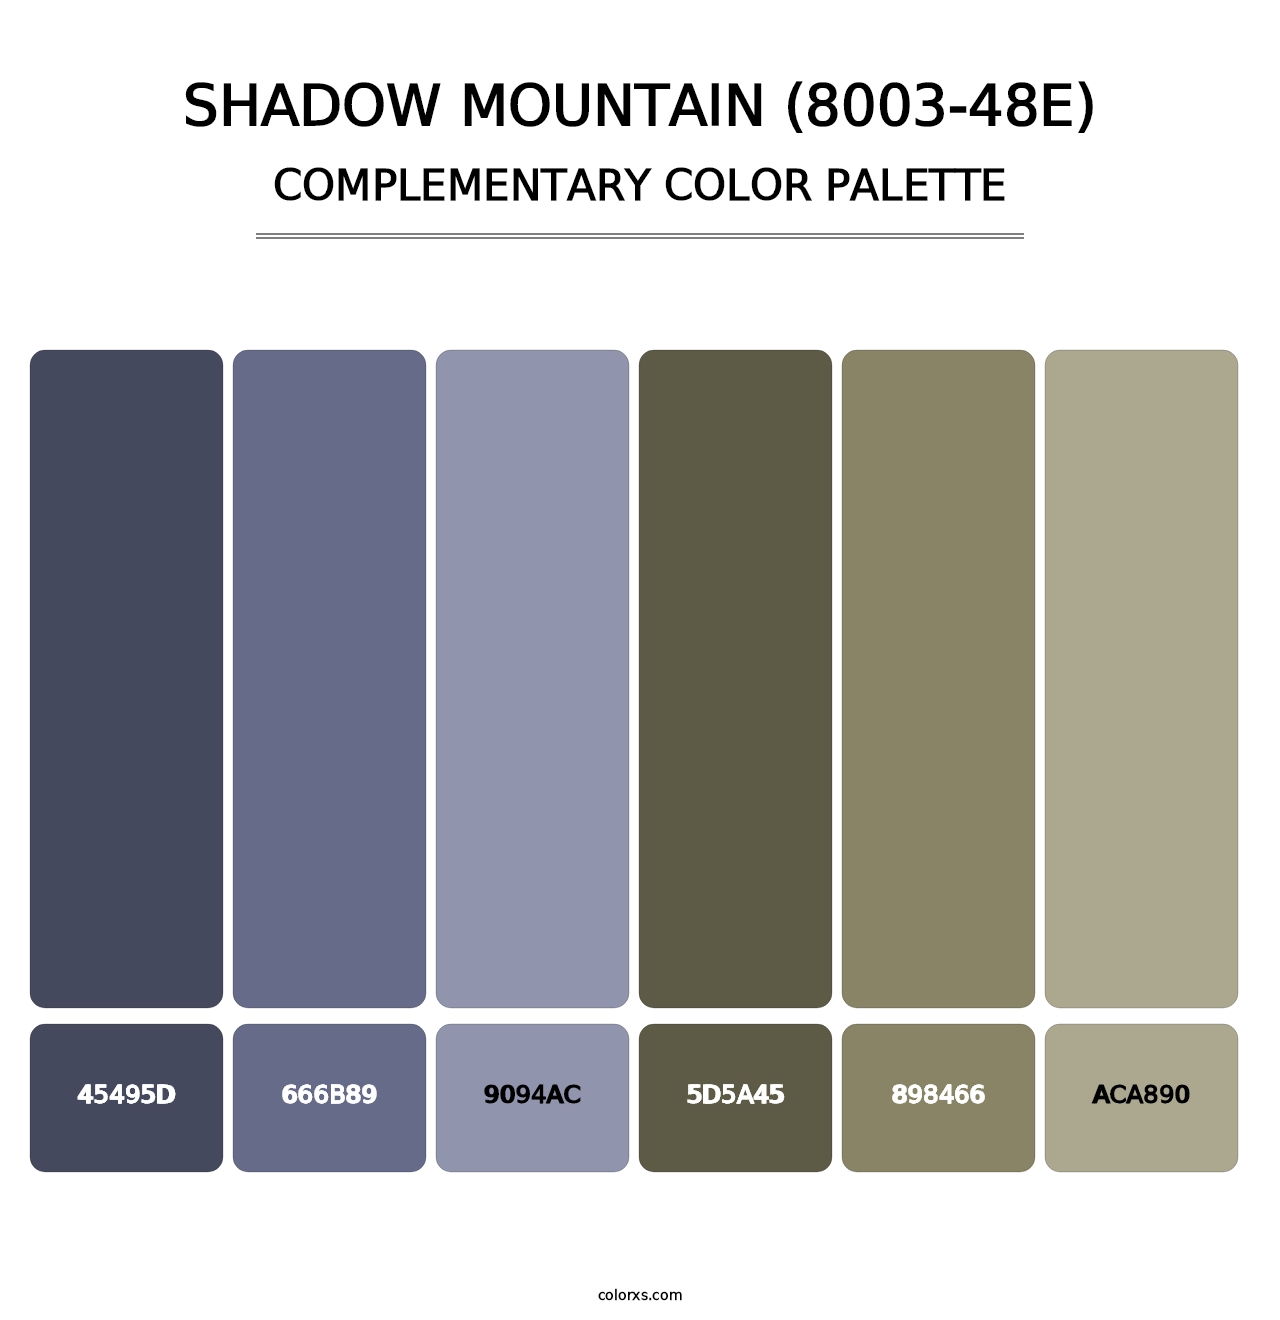 Shadow Mountain (8003-48E) - Complementary Color Palette